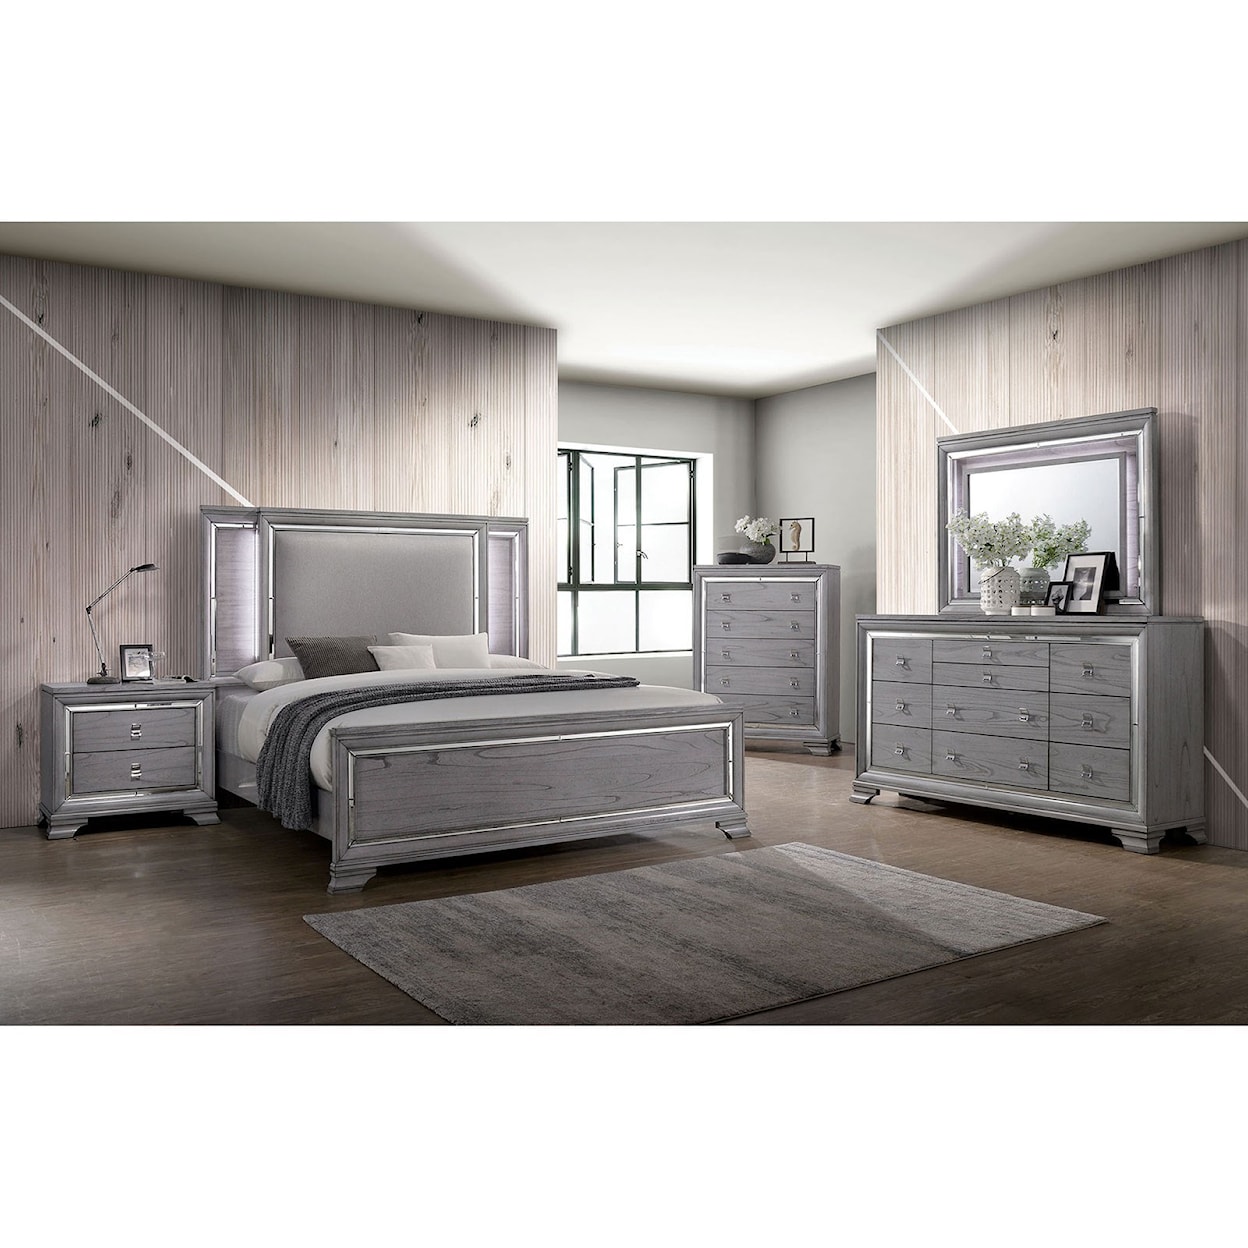 Furniture of America Alanis Queen Upholstered Bed